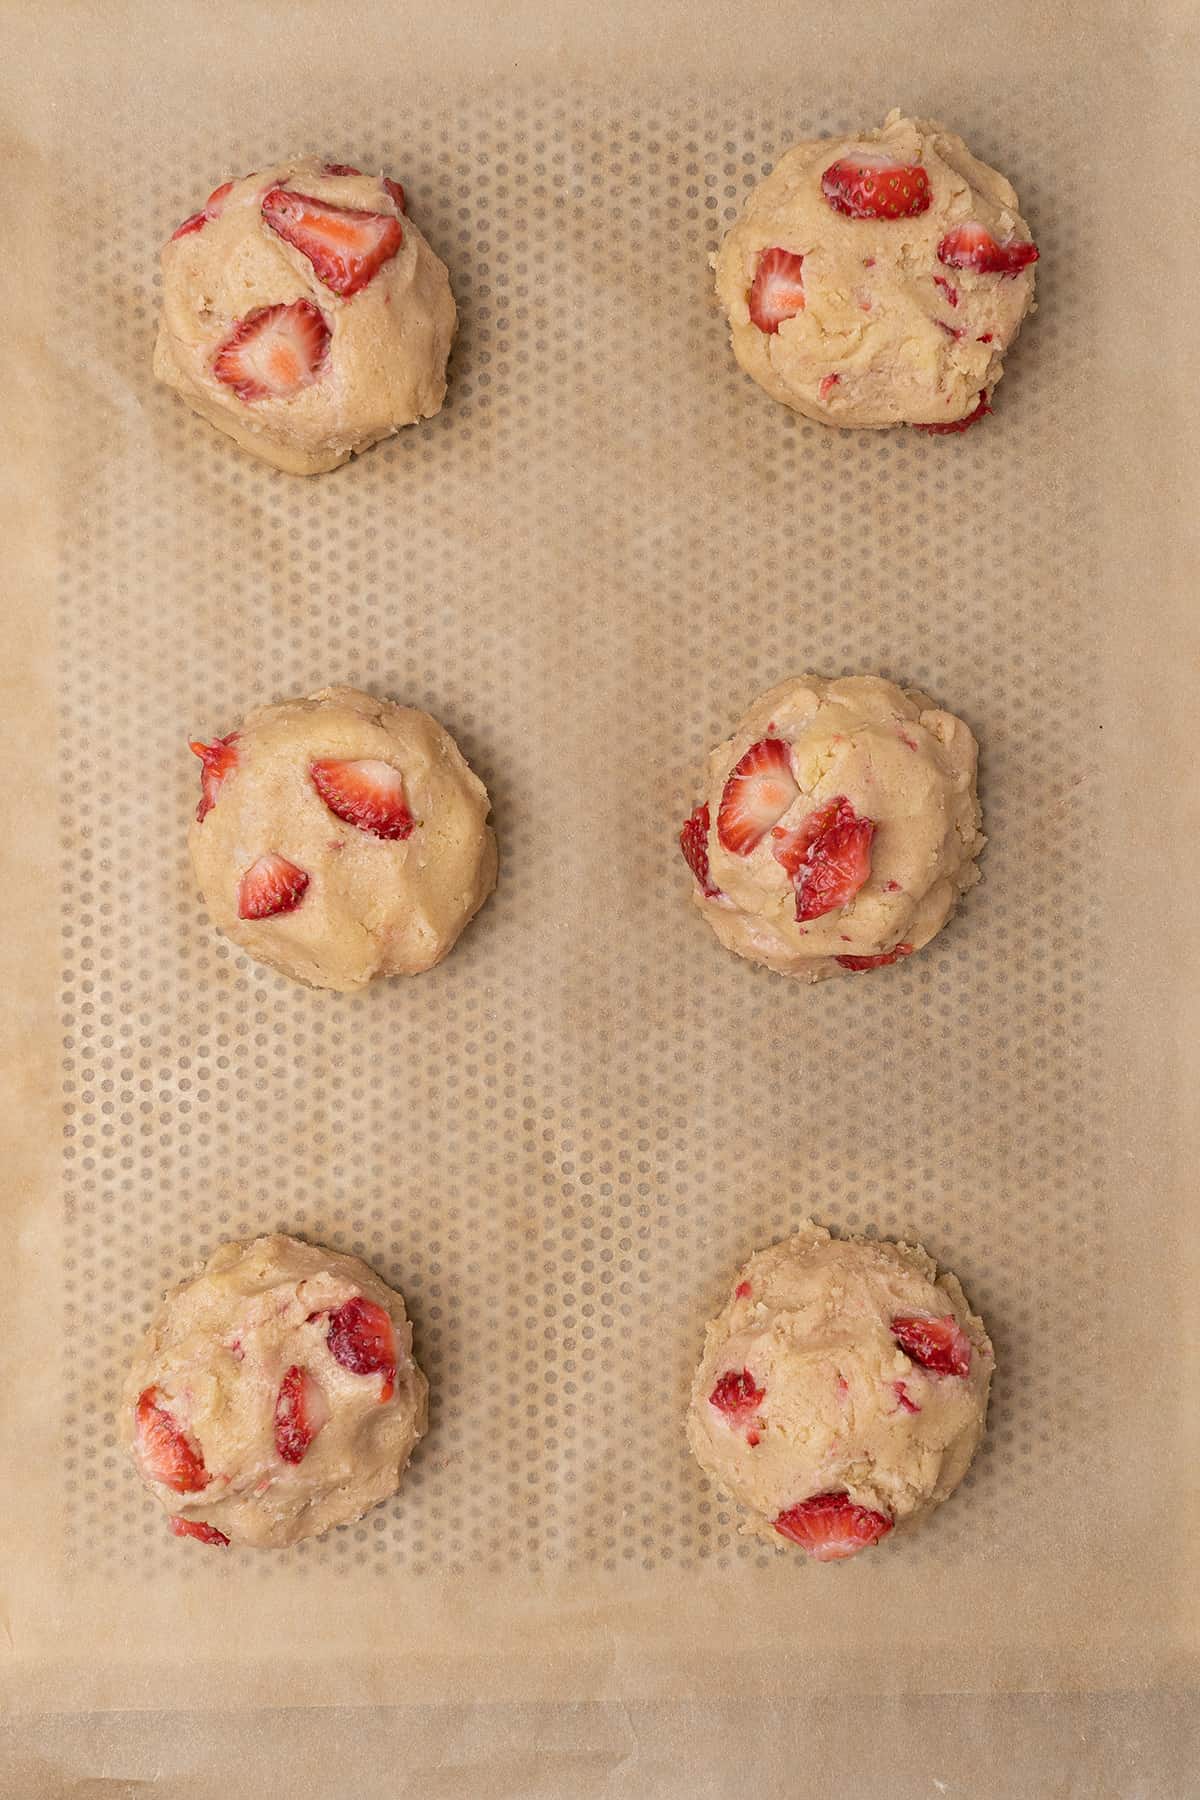 6 Strawberry cheesecake cookie balls after assembling, before baking